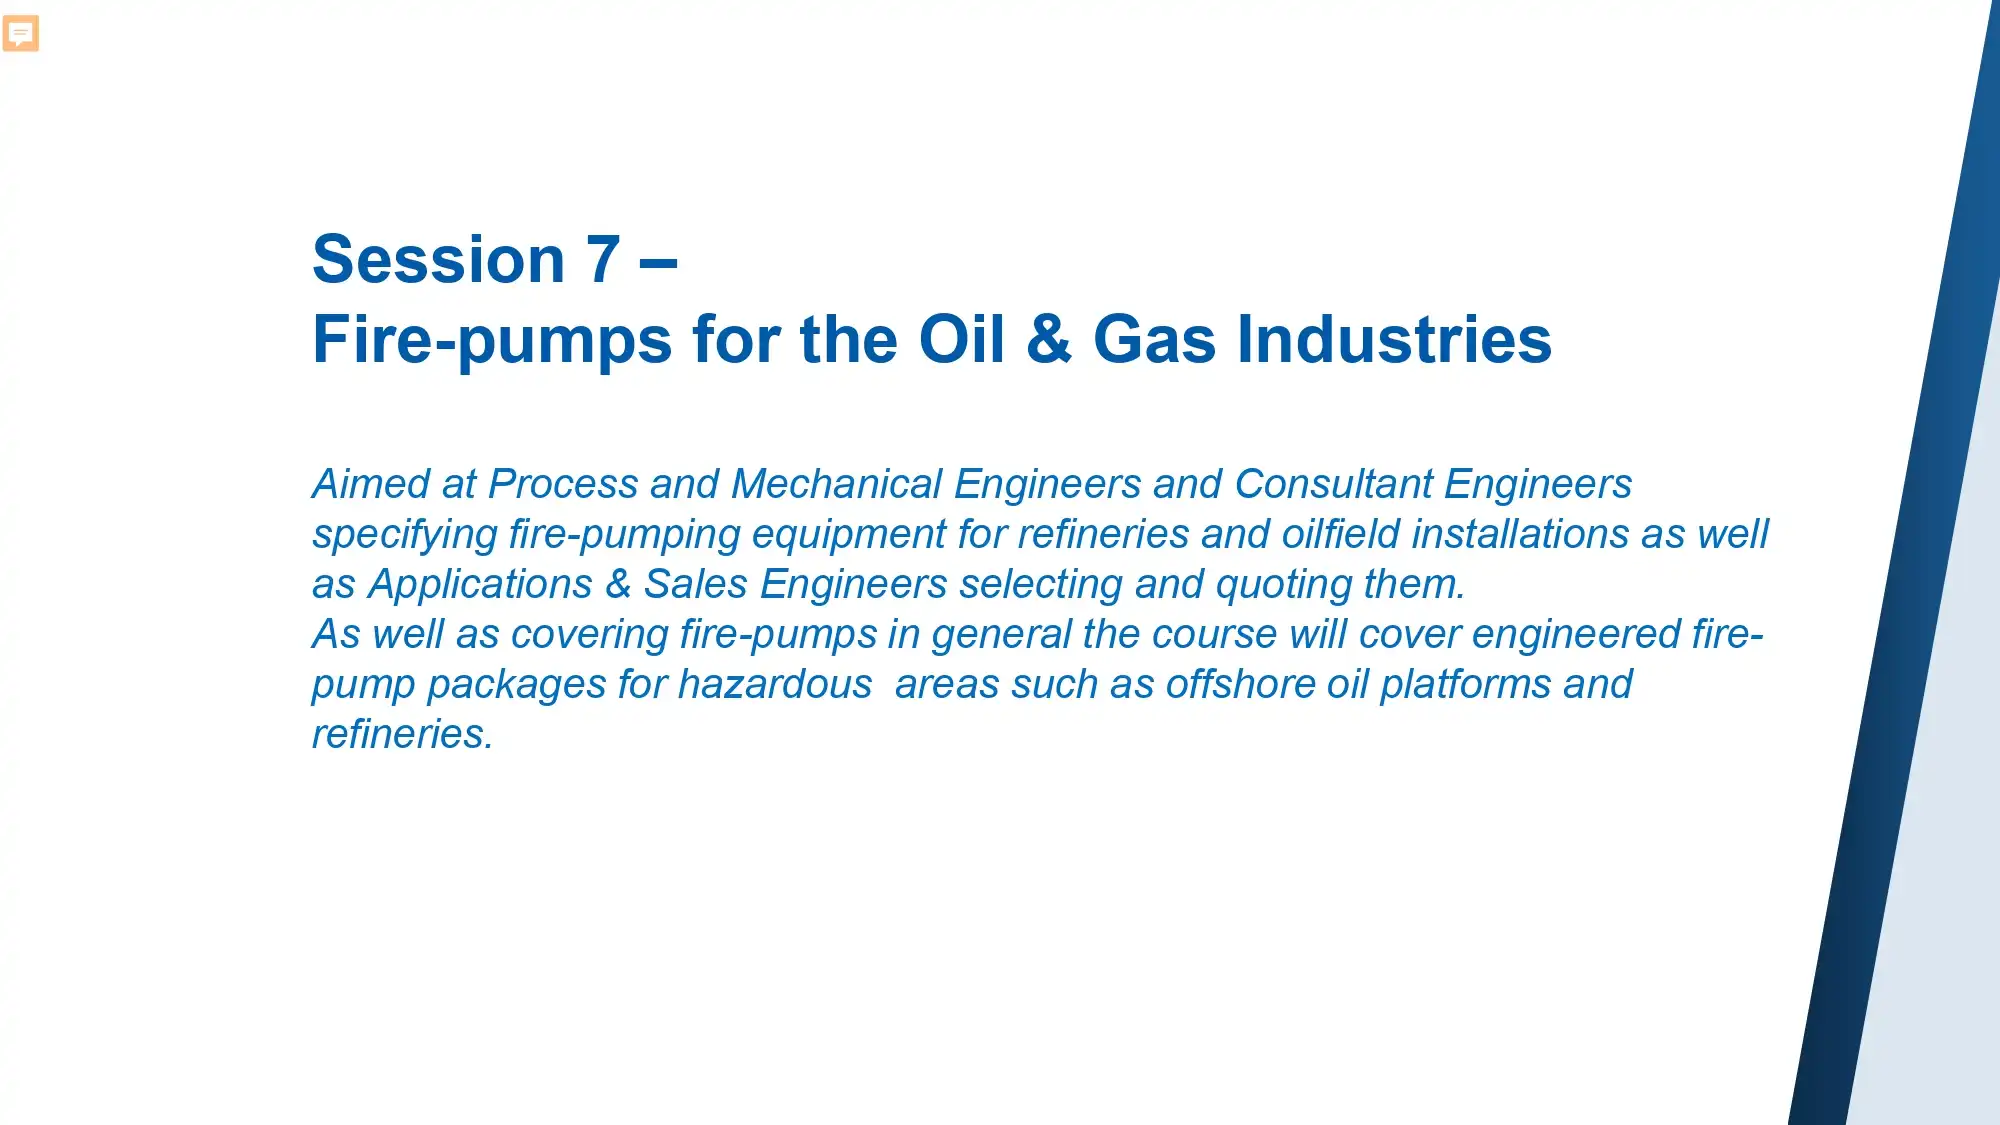 Session 7 – Fire-pumps for the Oil & Gas Industries